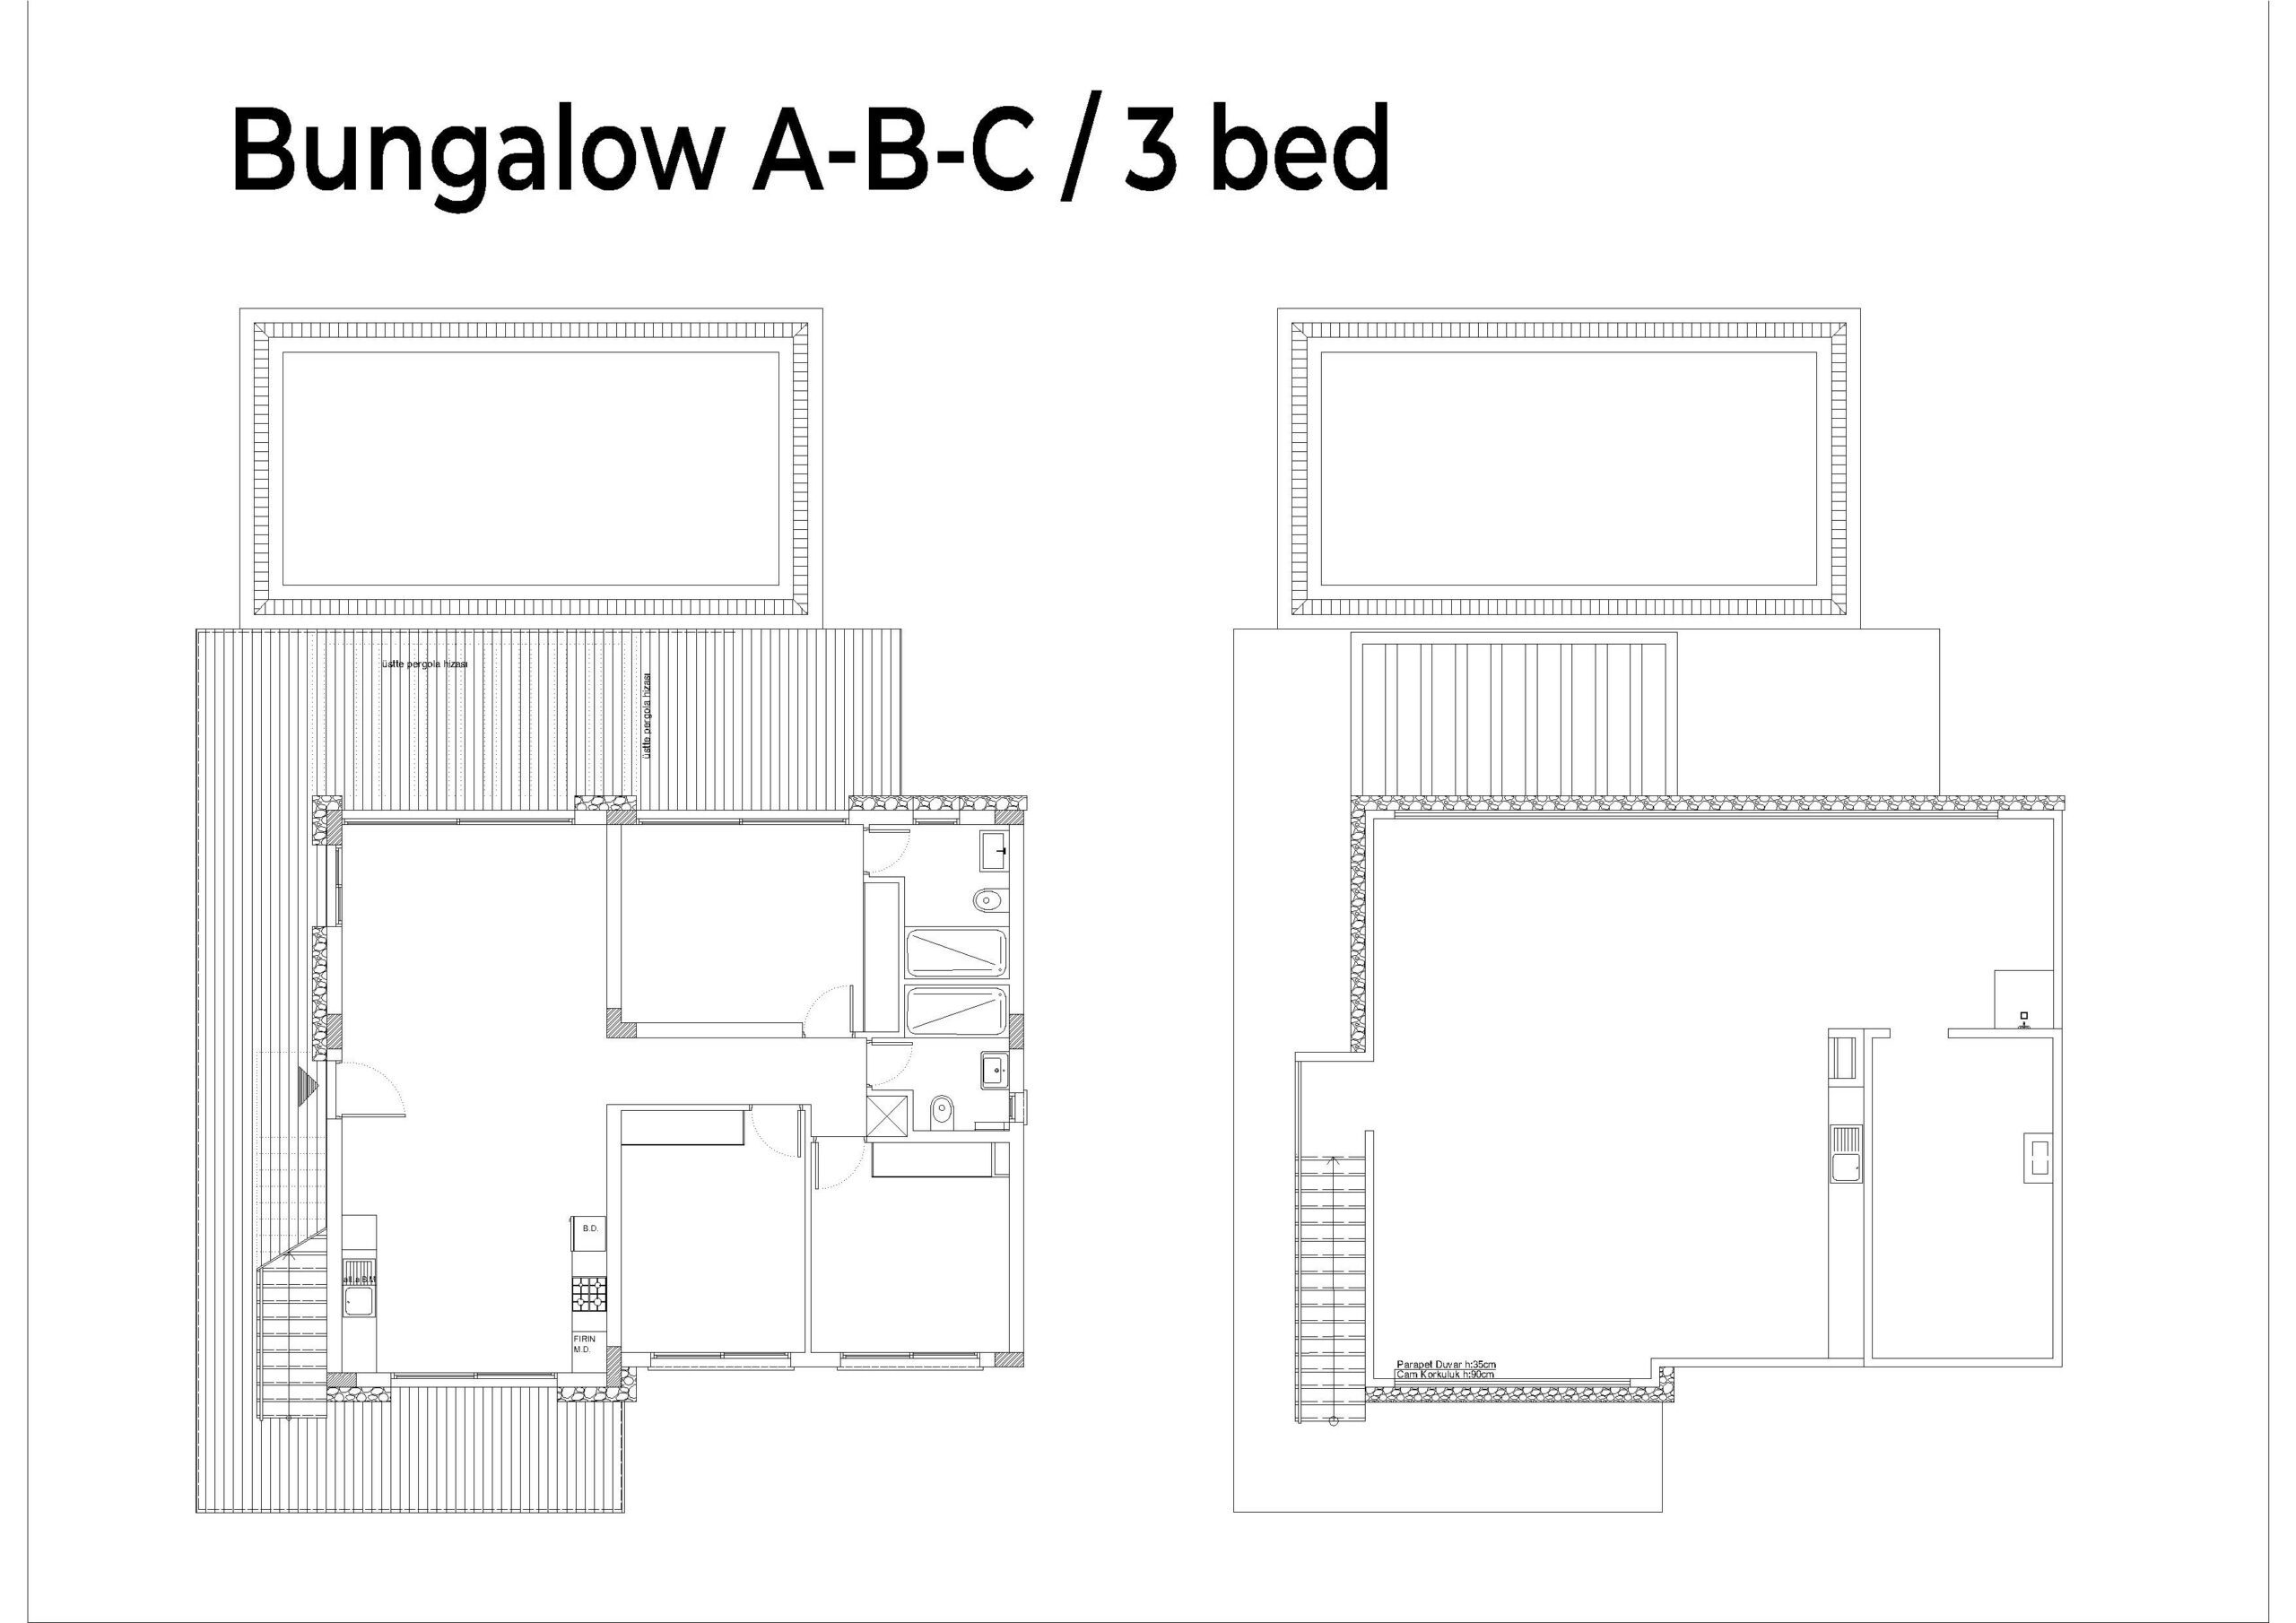 4-Zimmer (Bungalows)